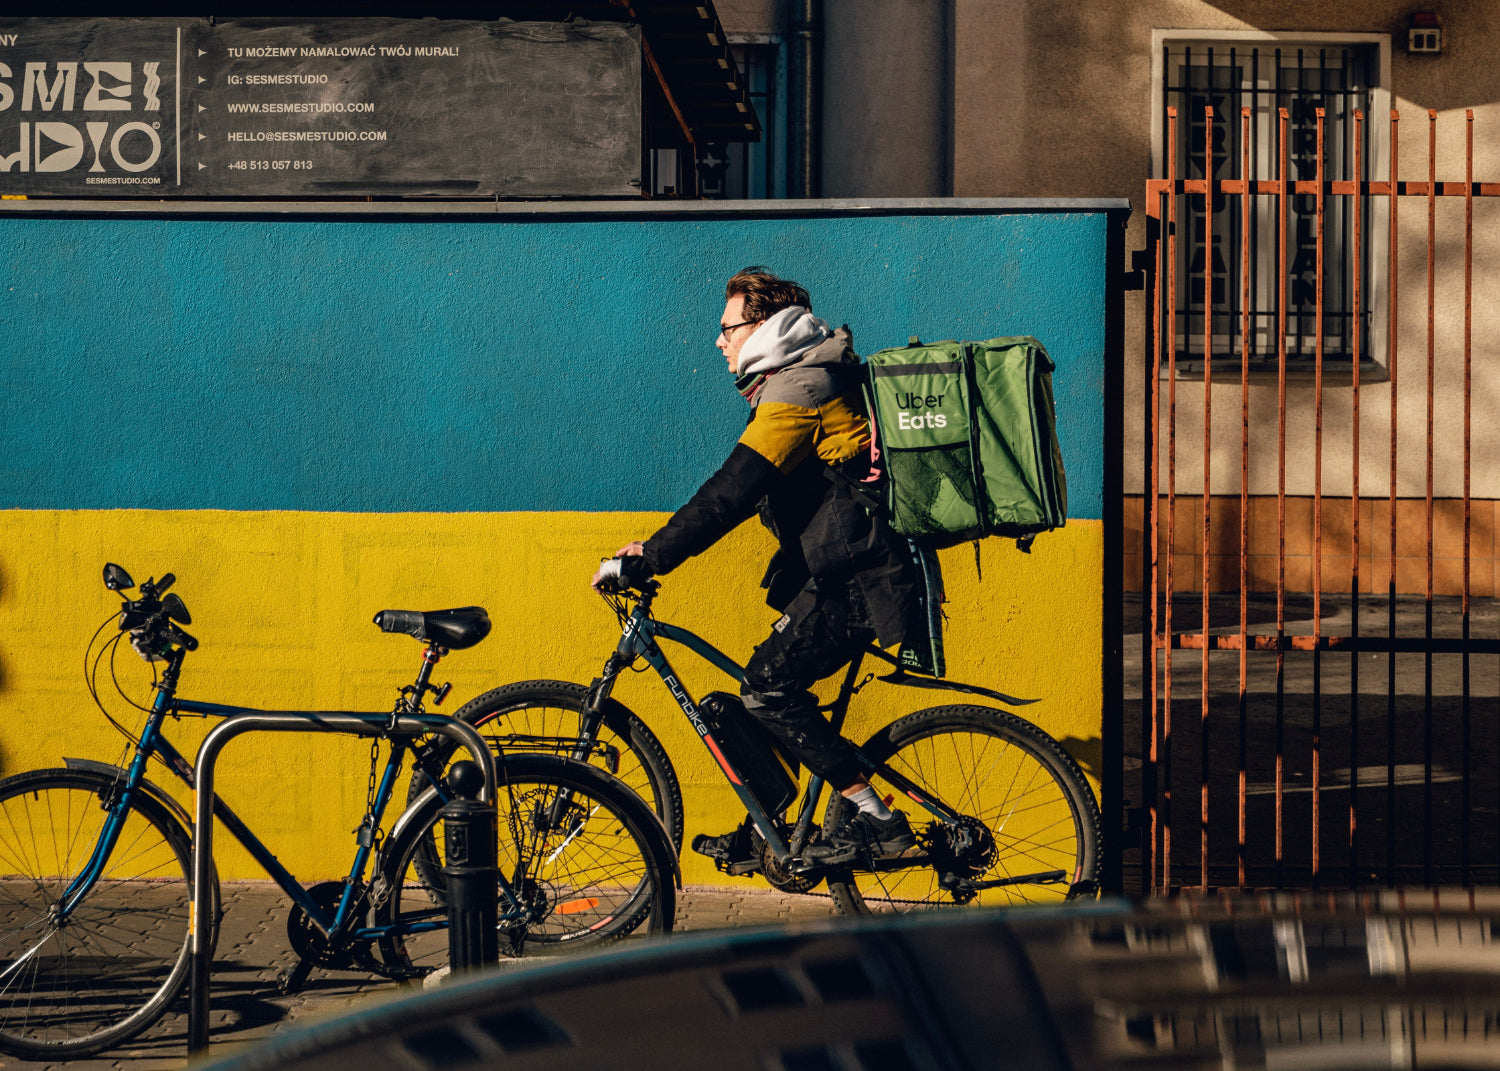 A person does makes money online through gig work by delivering food by bike in a city